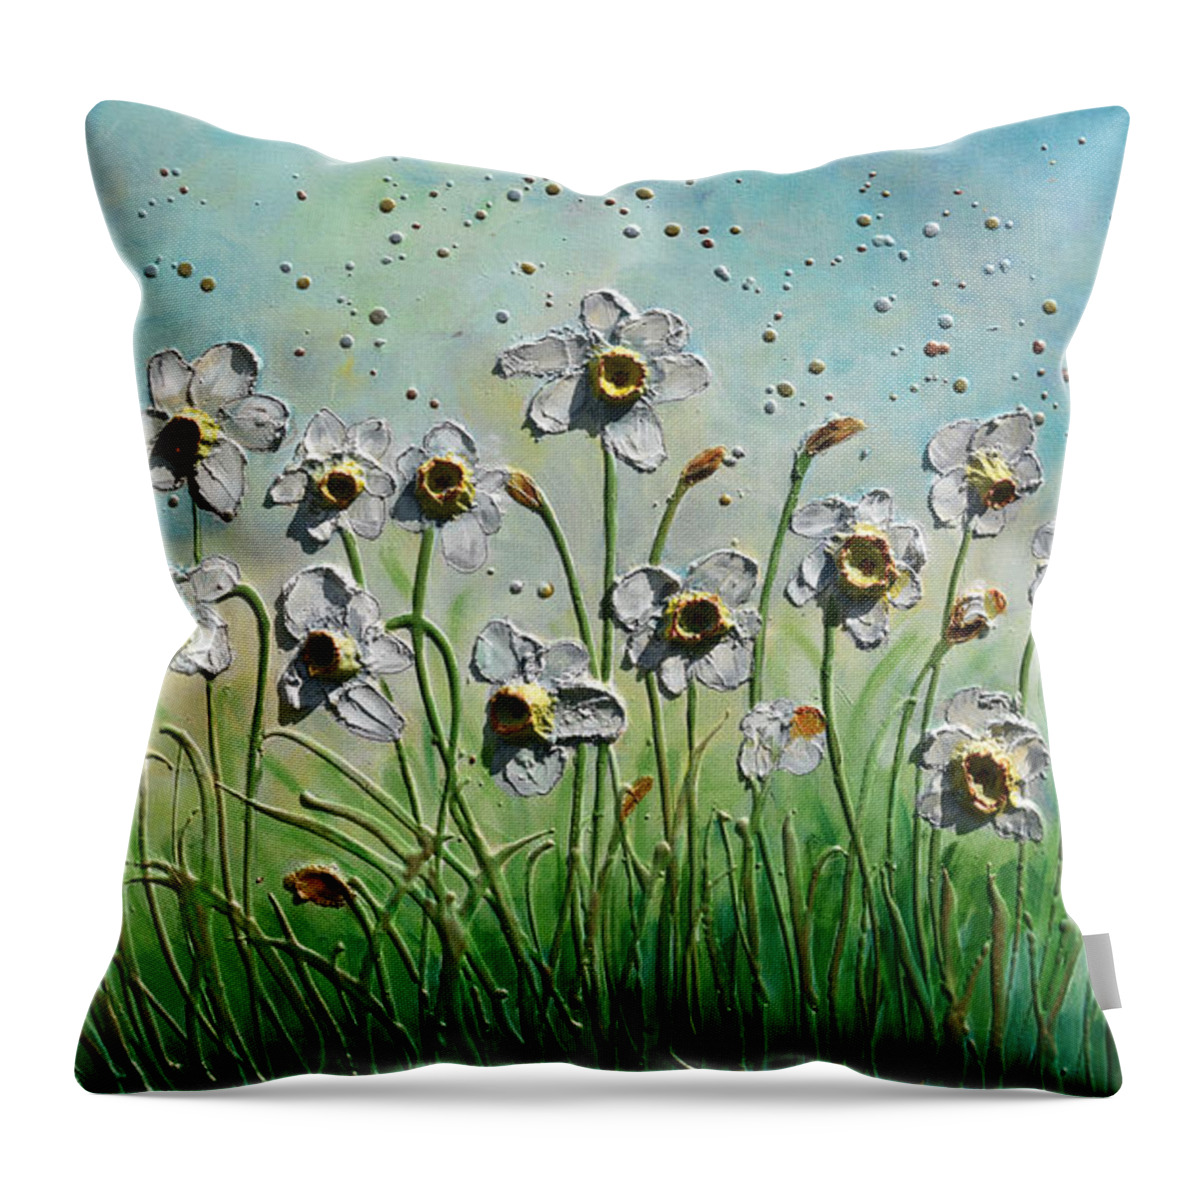 Daffodils Throw Pillow featuring the painting White Daffodils by Amanda Dagg